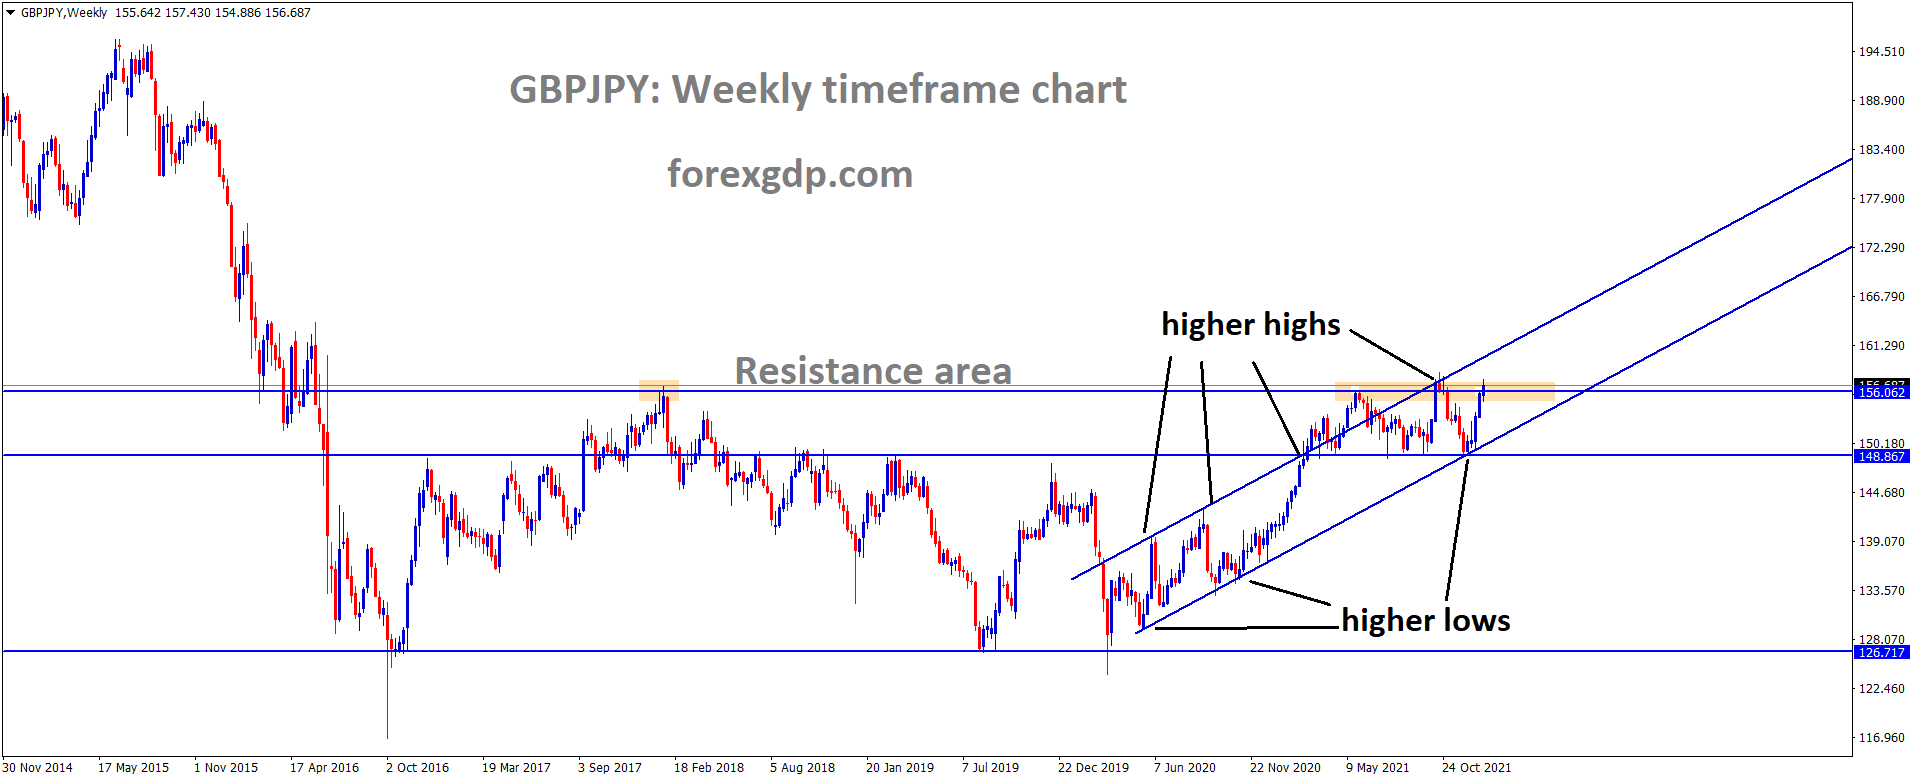 GBPJPY is moving in an Ascending channel and the market has reached the horizontal resistance area of the channel.